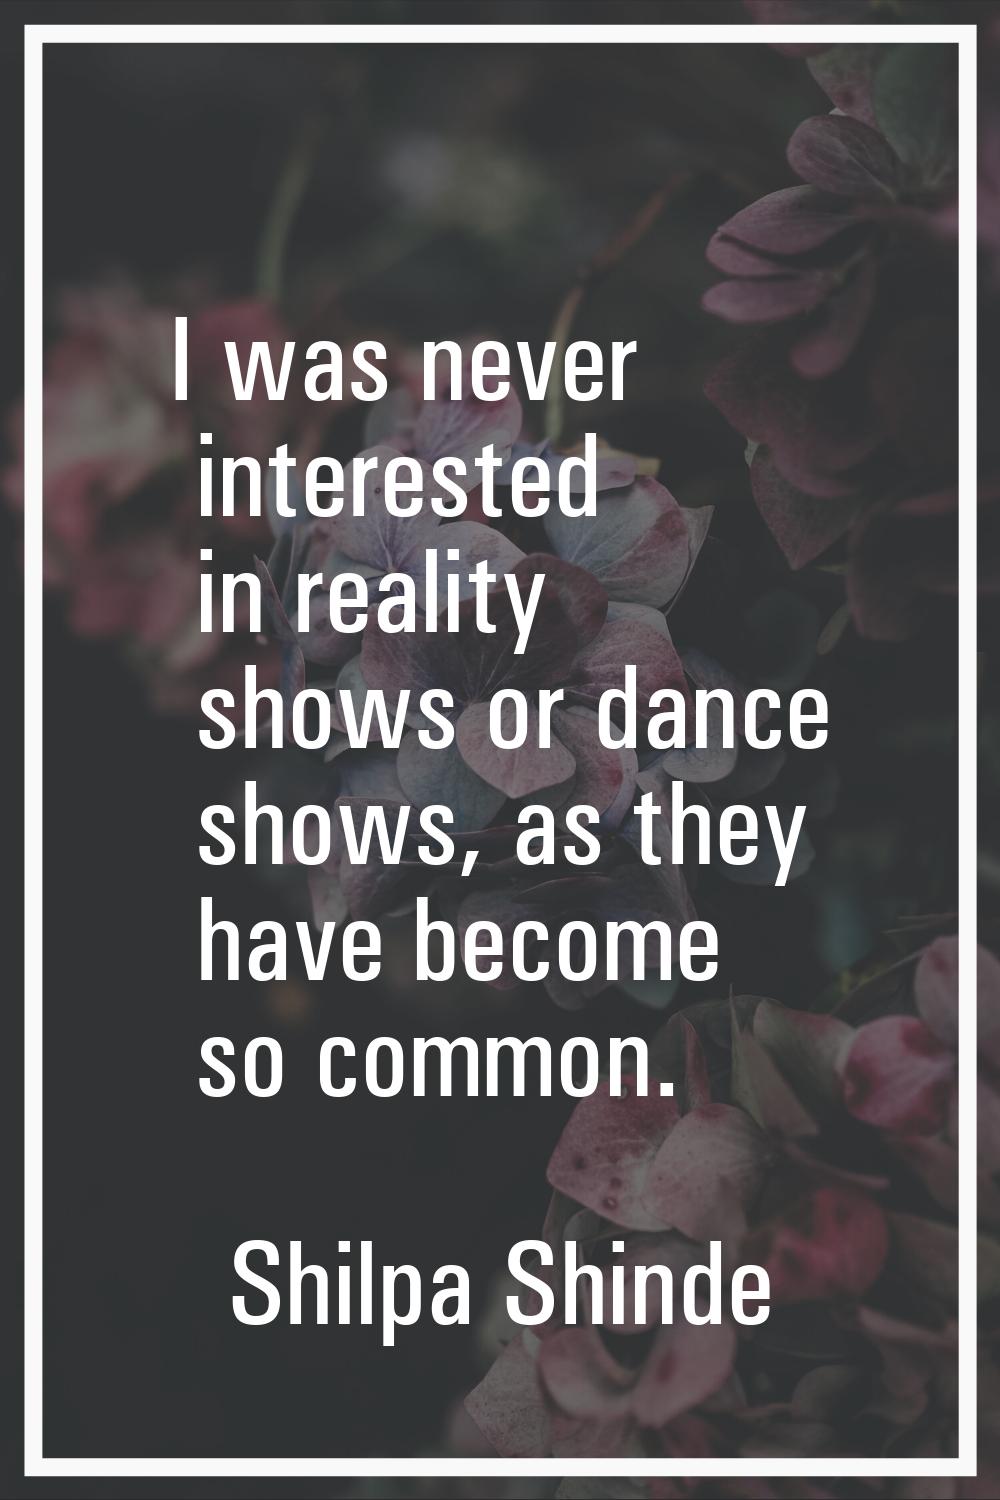 I was never interested in reality shows or dance shows, as they have become so common.